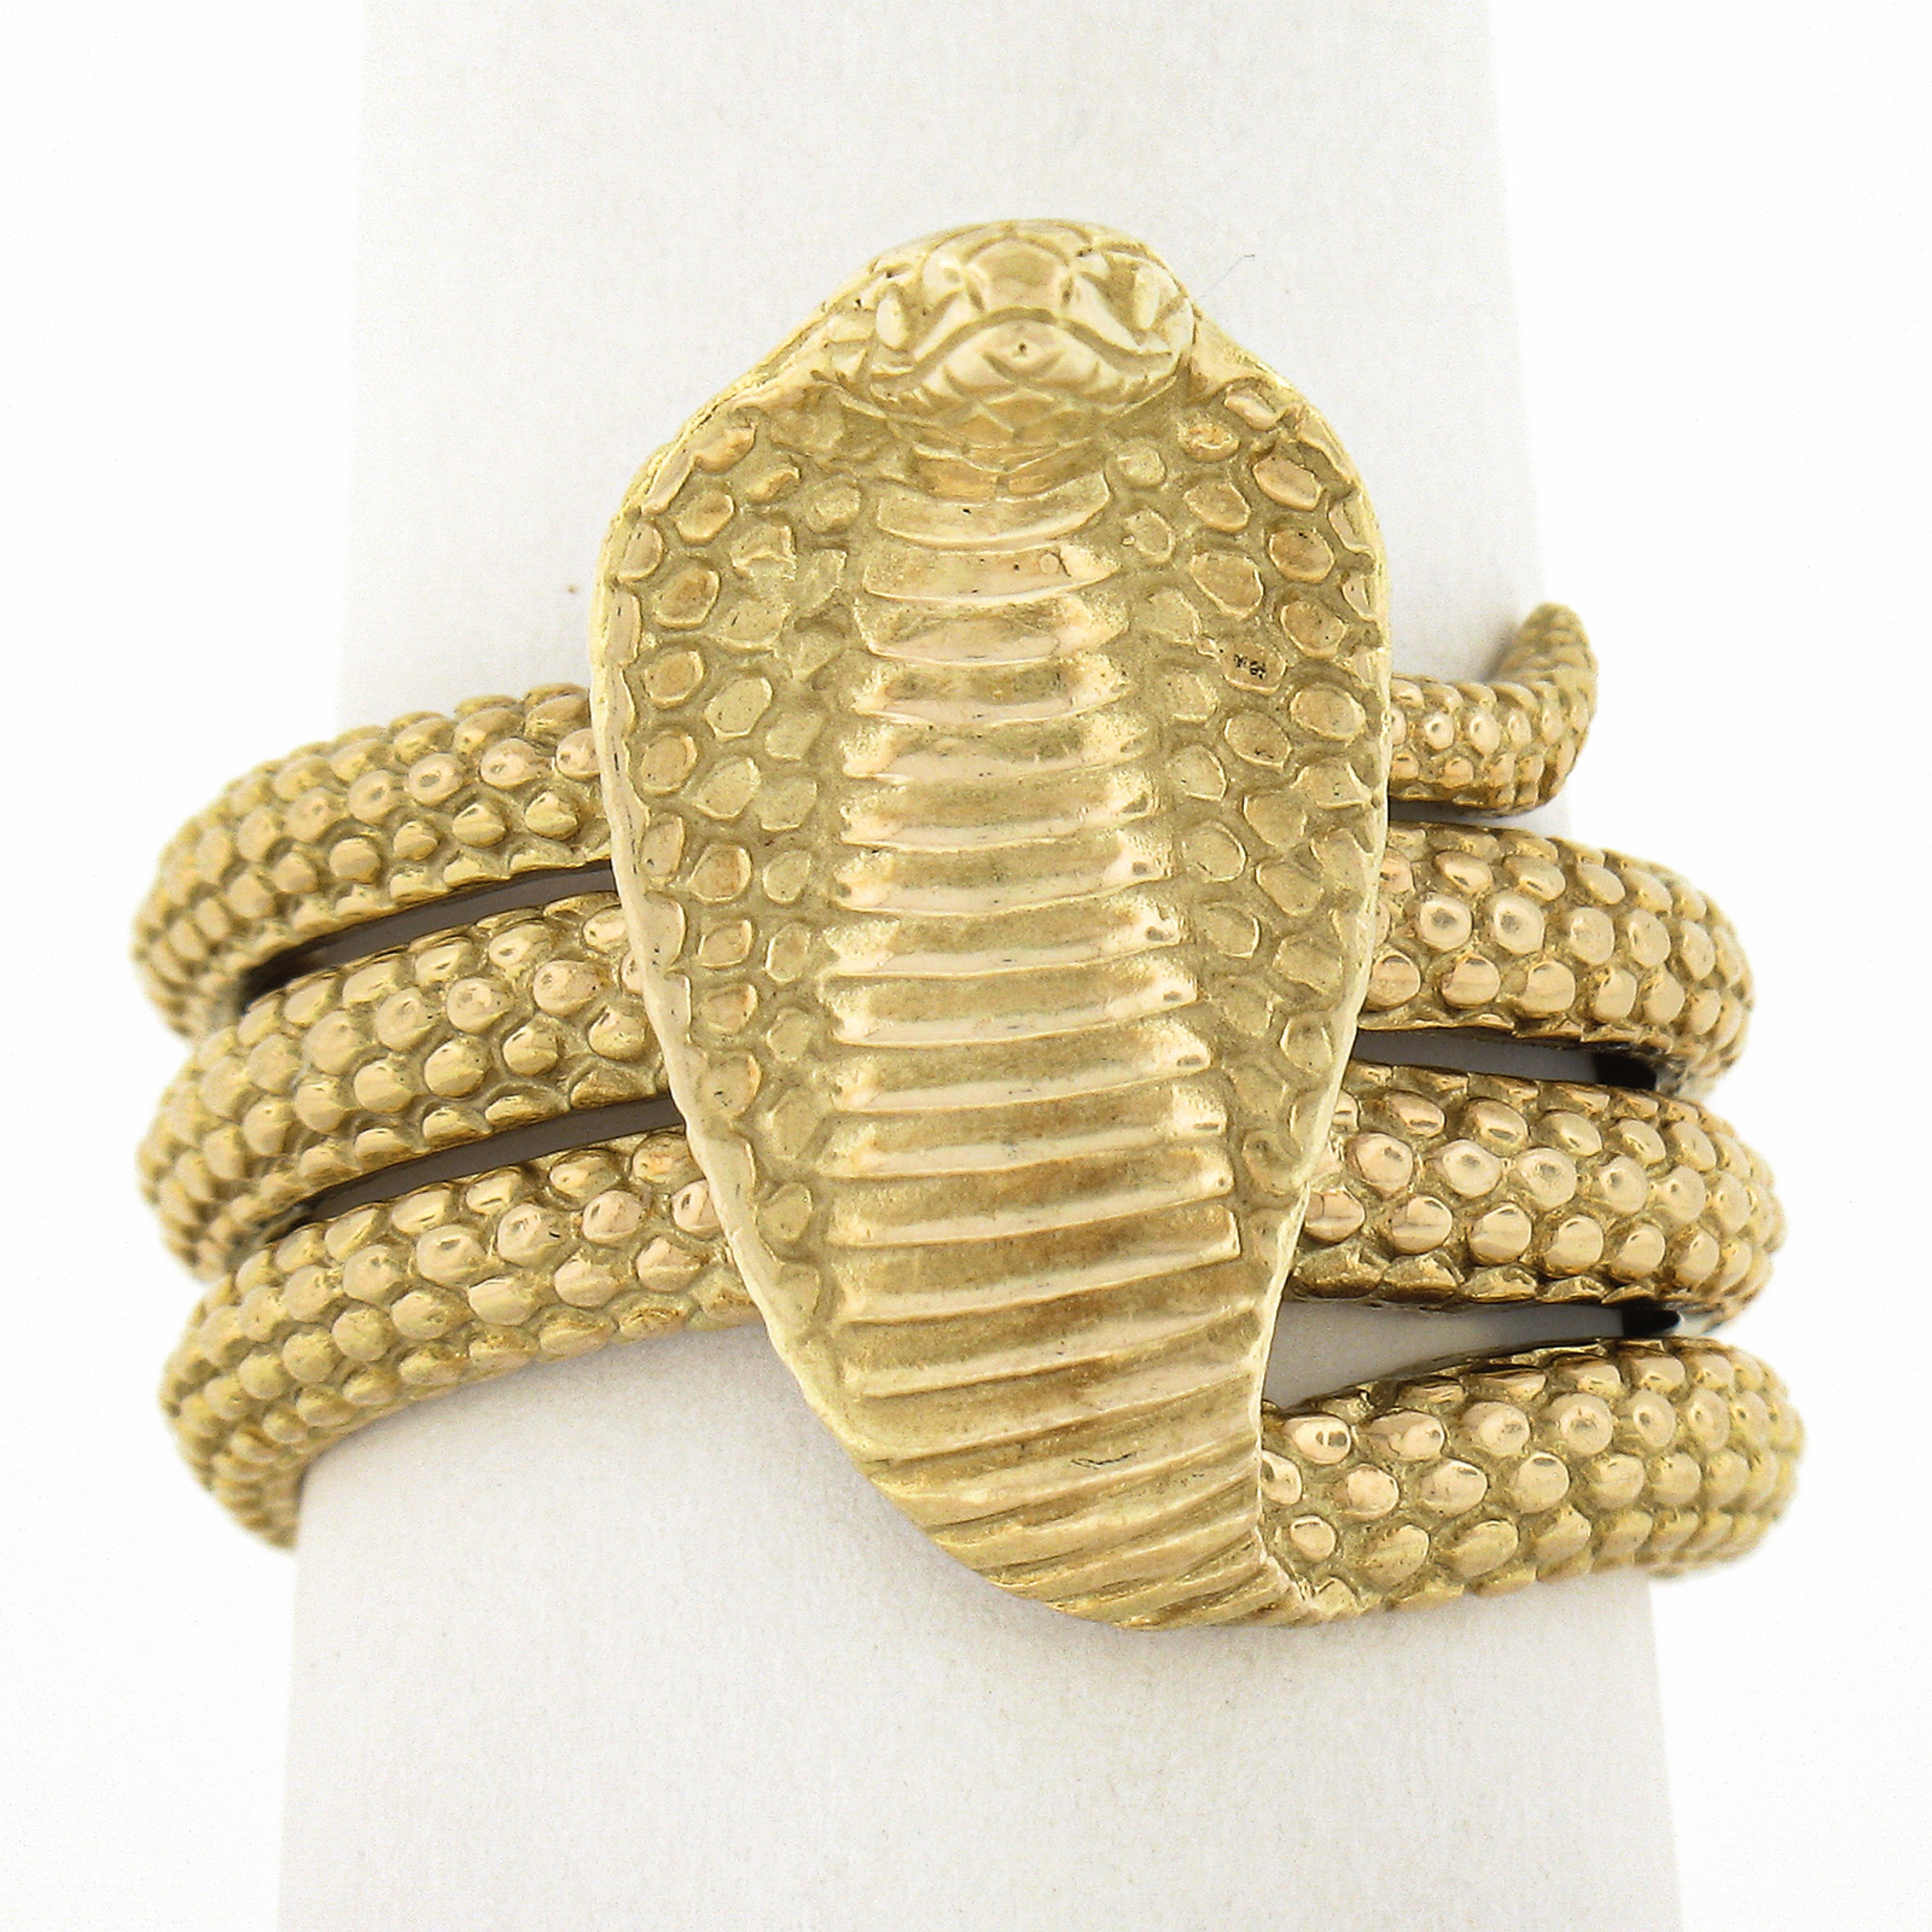 Here we have an one of the most incredible snake rings we have EVER seen. It is a cobra snake band ring crafted from solid 18k yellow gold and features a nicely high detailed textured coiled snake design with the cobra snake head and tail elegantly